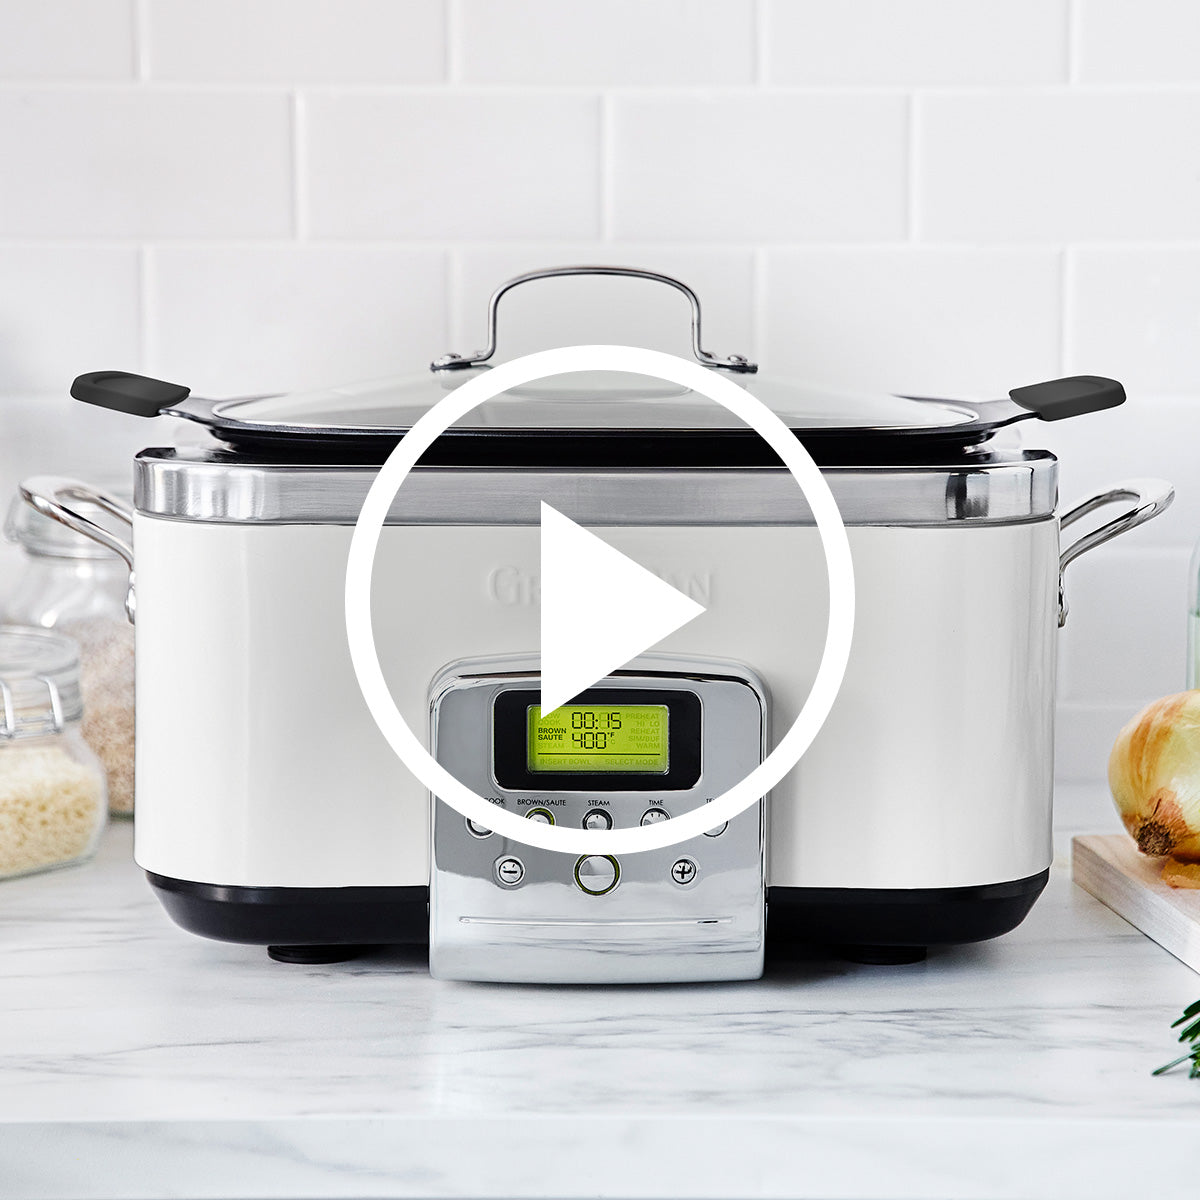 All-Clad Stainless Steel 7-Quart Deluxe Slow Cooker with Aluminum